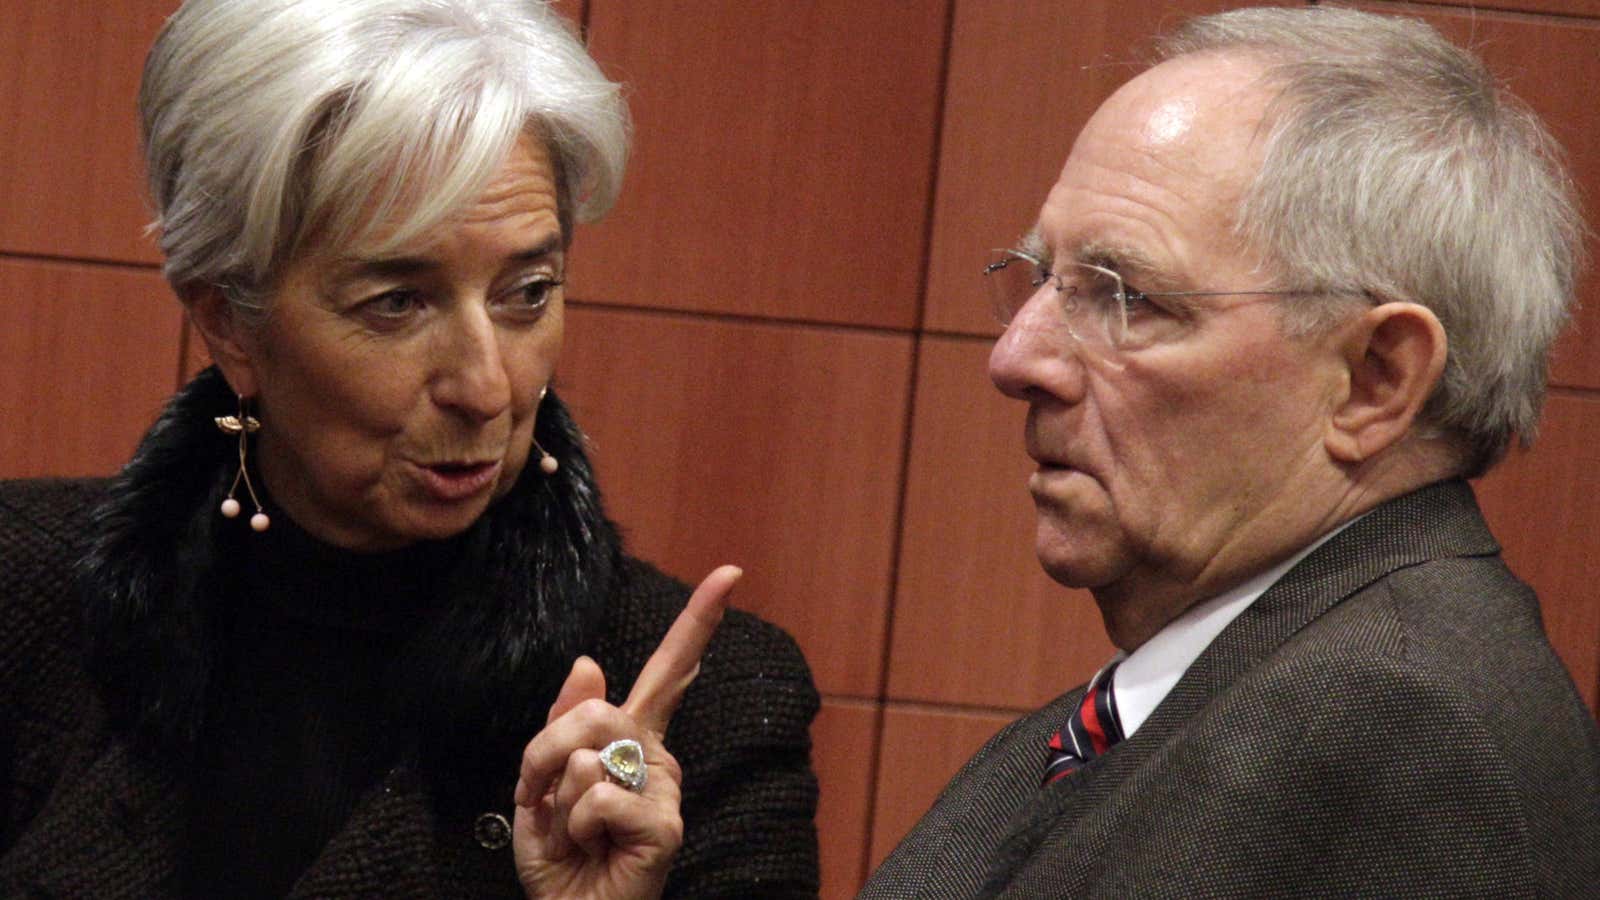 The IMF’s Christine Lagarde has some news that Germany’s Wolfgang Schäuble doesn’t want to hear.